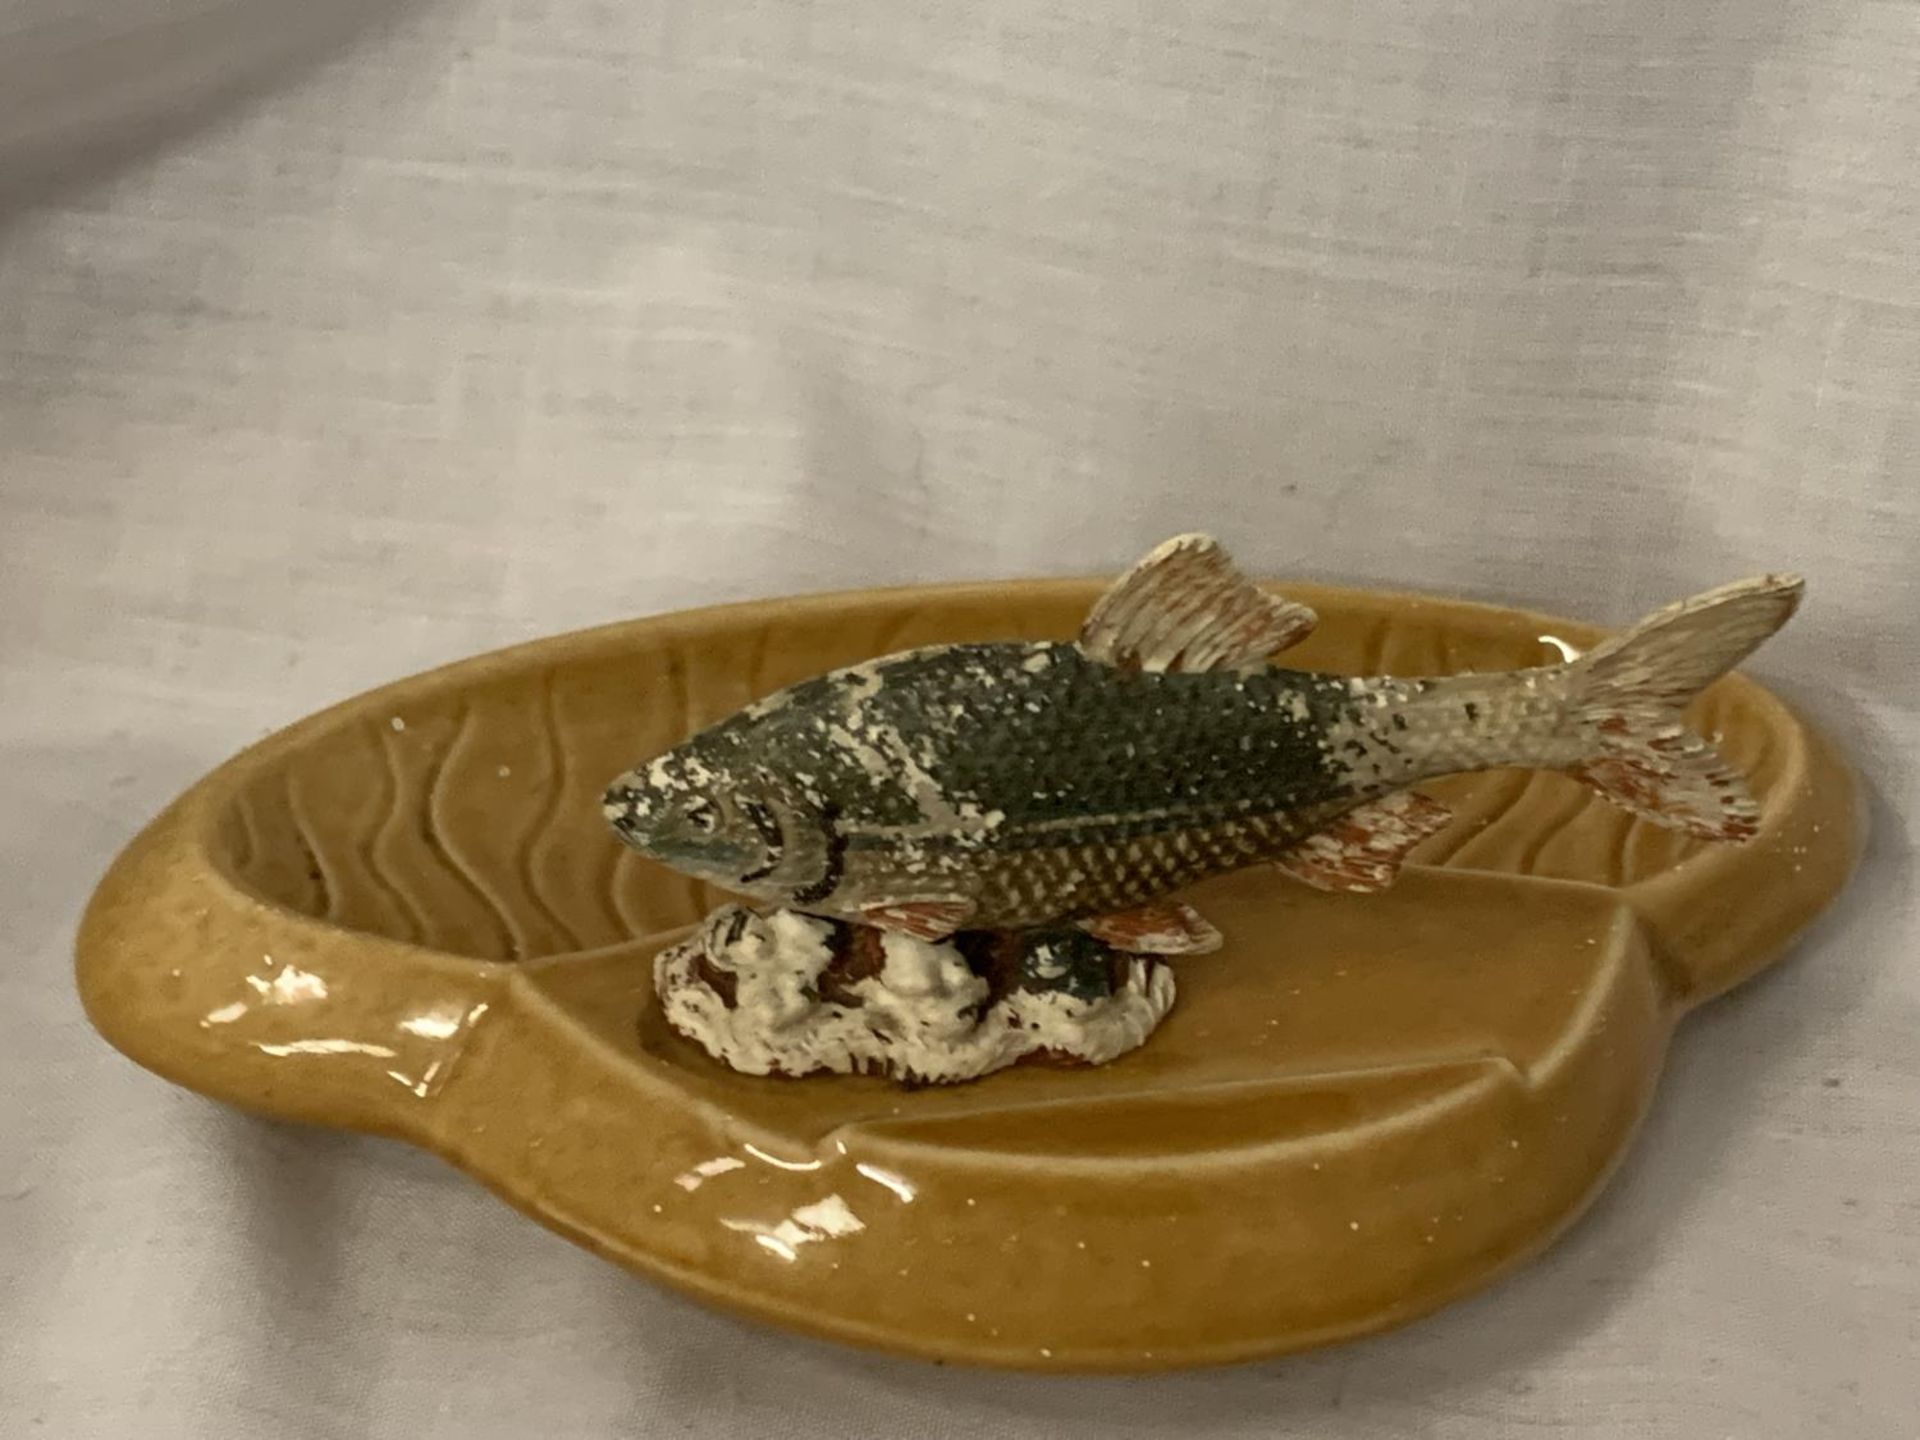 AN RK PRODUCT BY WADE OF ENGLAND PIN DISH WITH ROACH FISH - Image 3 of 4